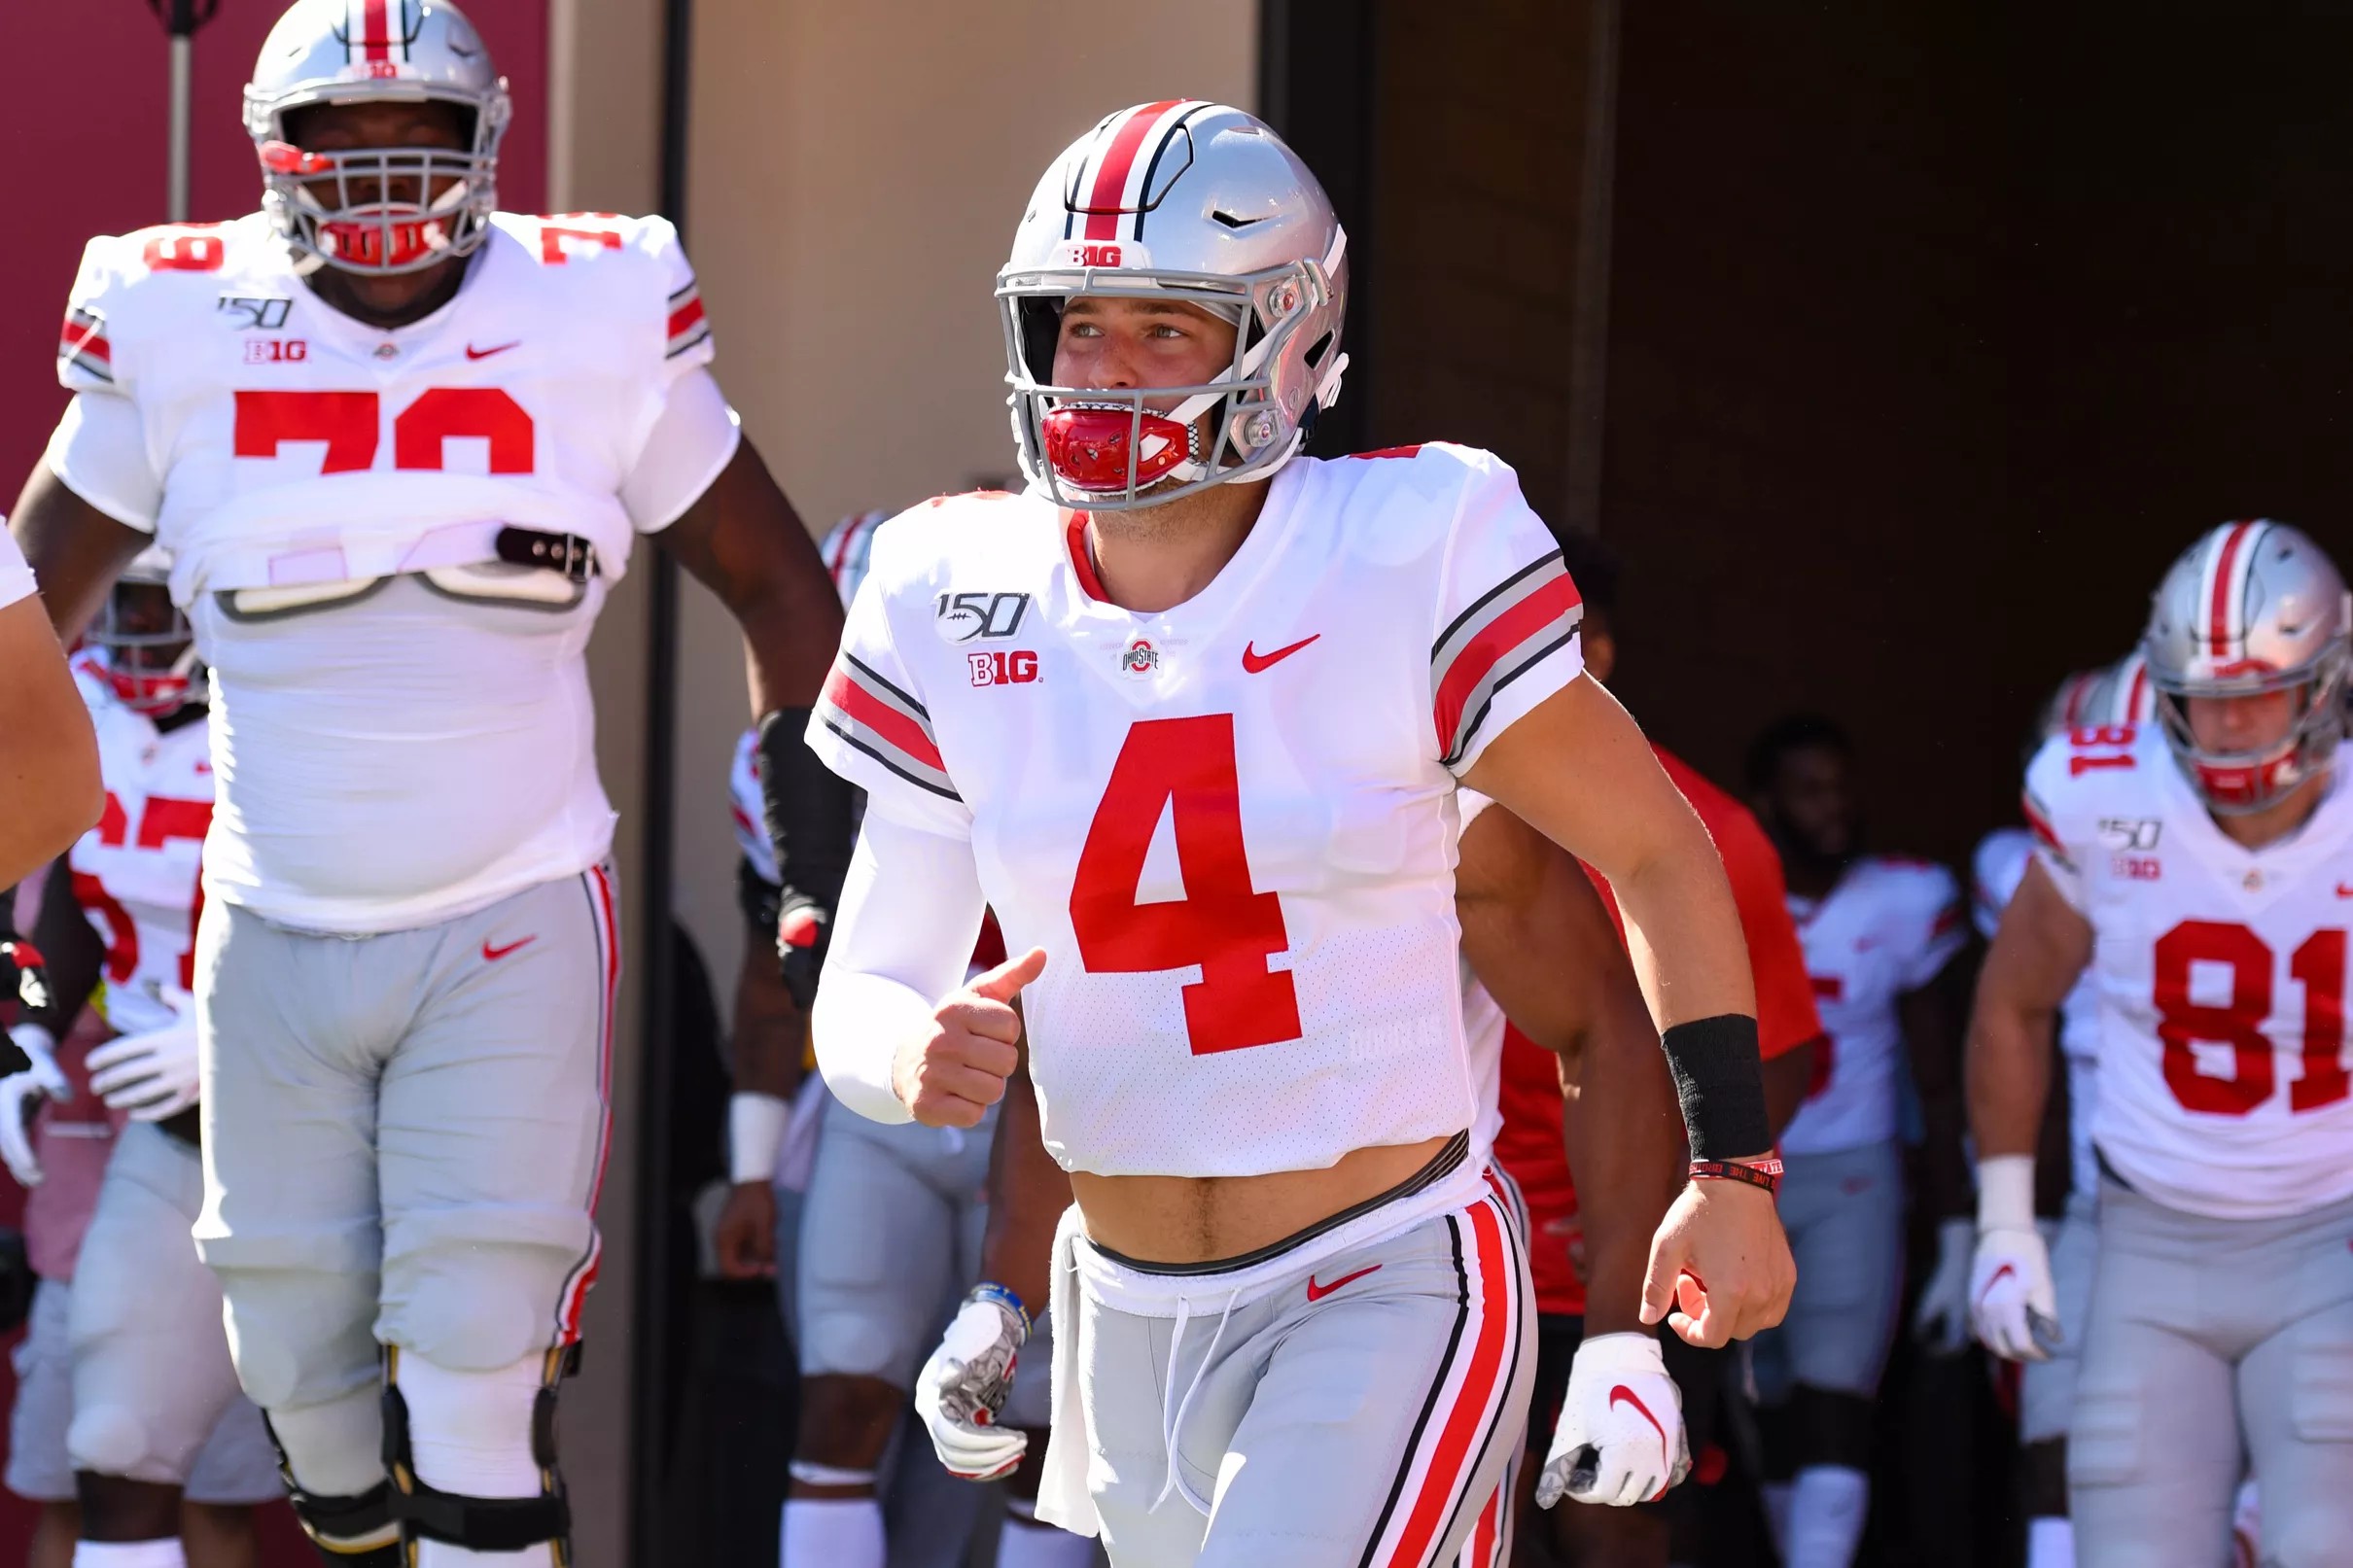 Ohio State backup quarterback Chris Chugunov excited to play in front